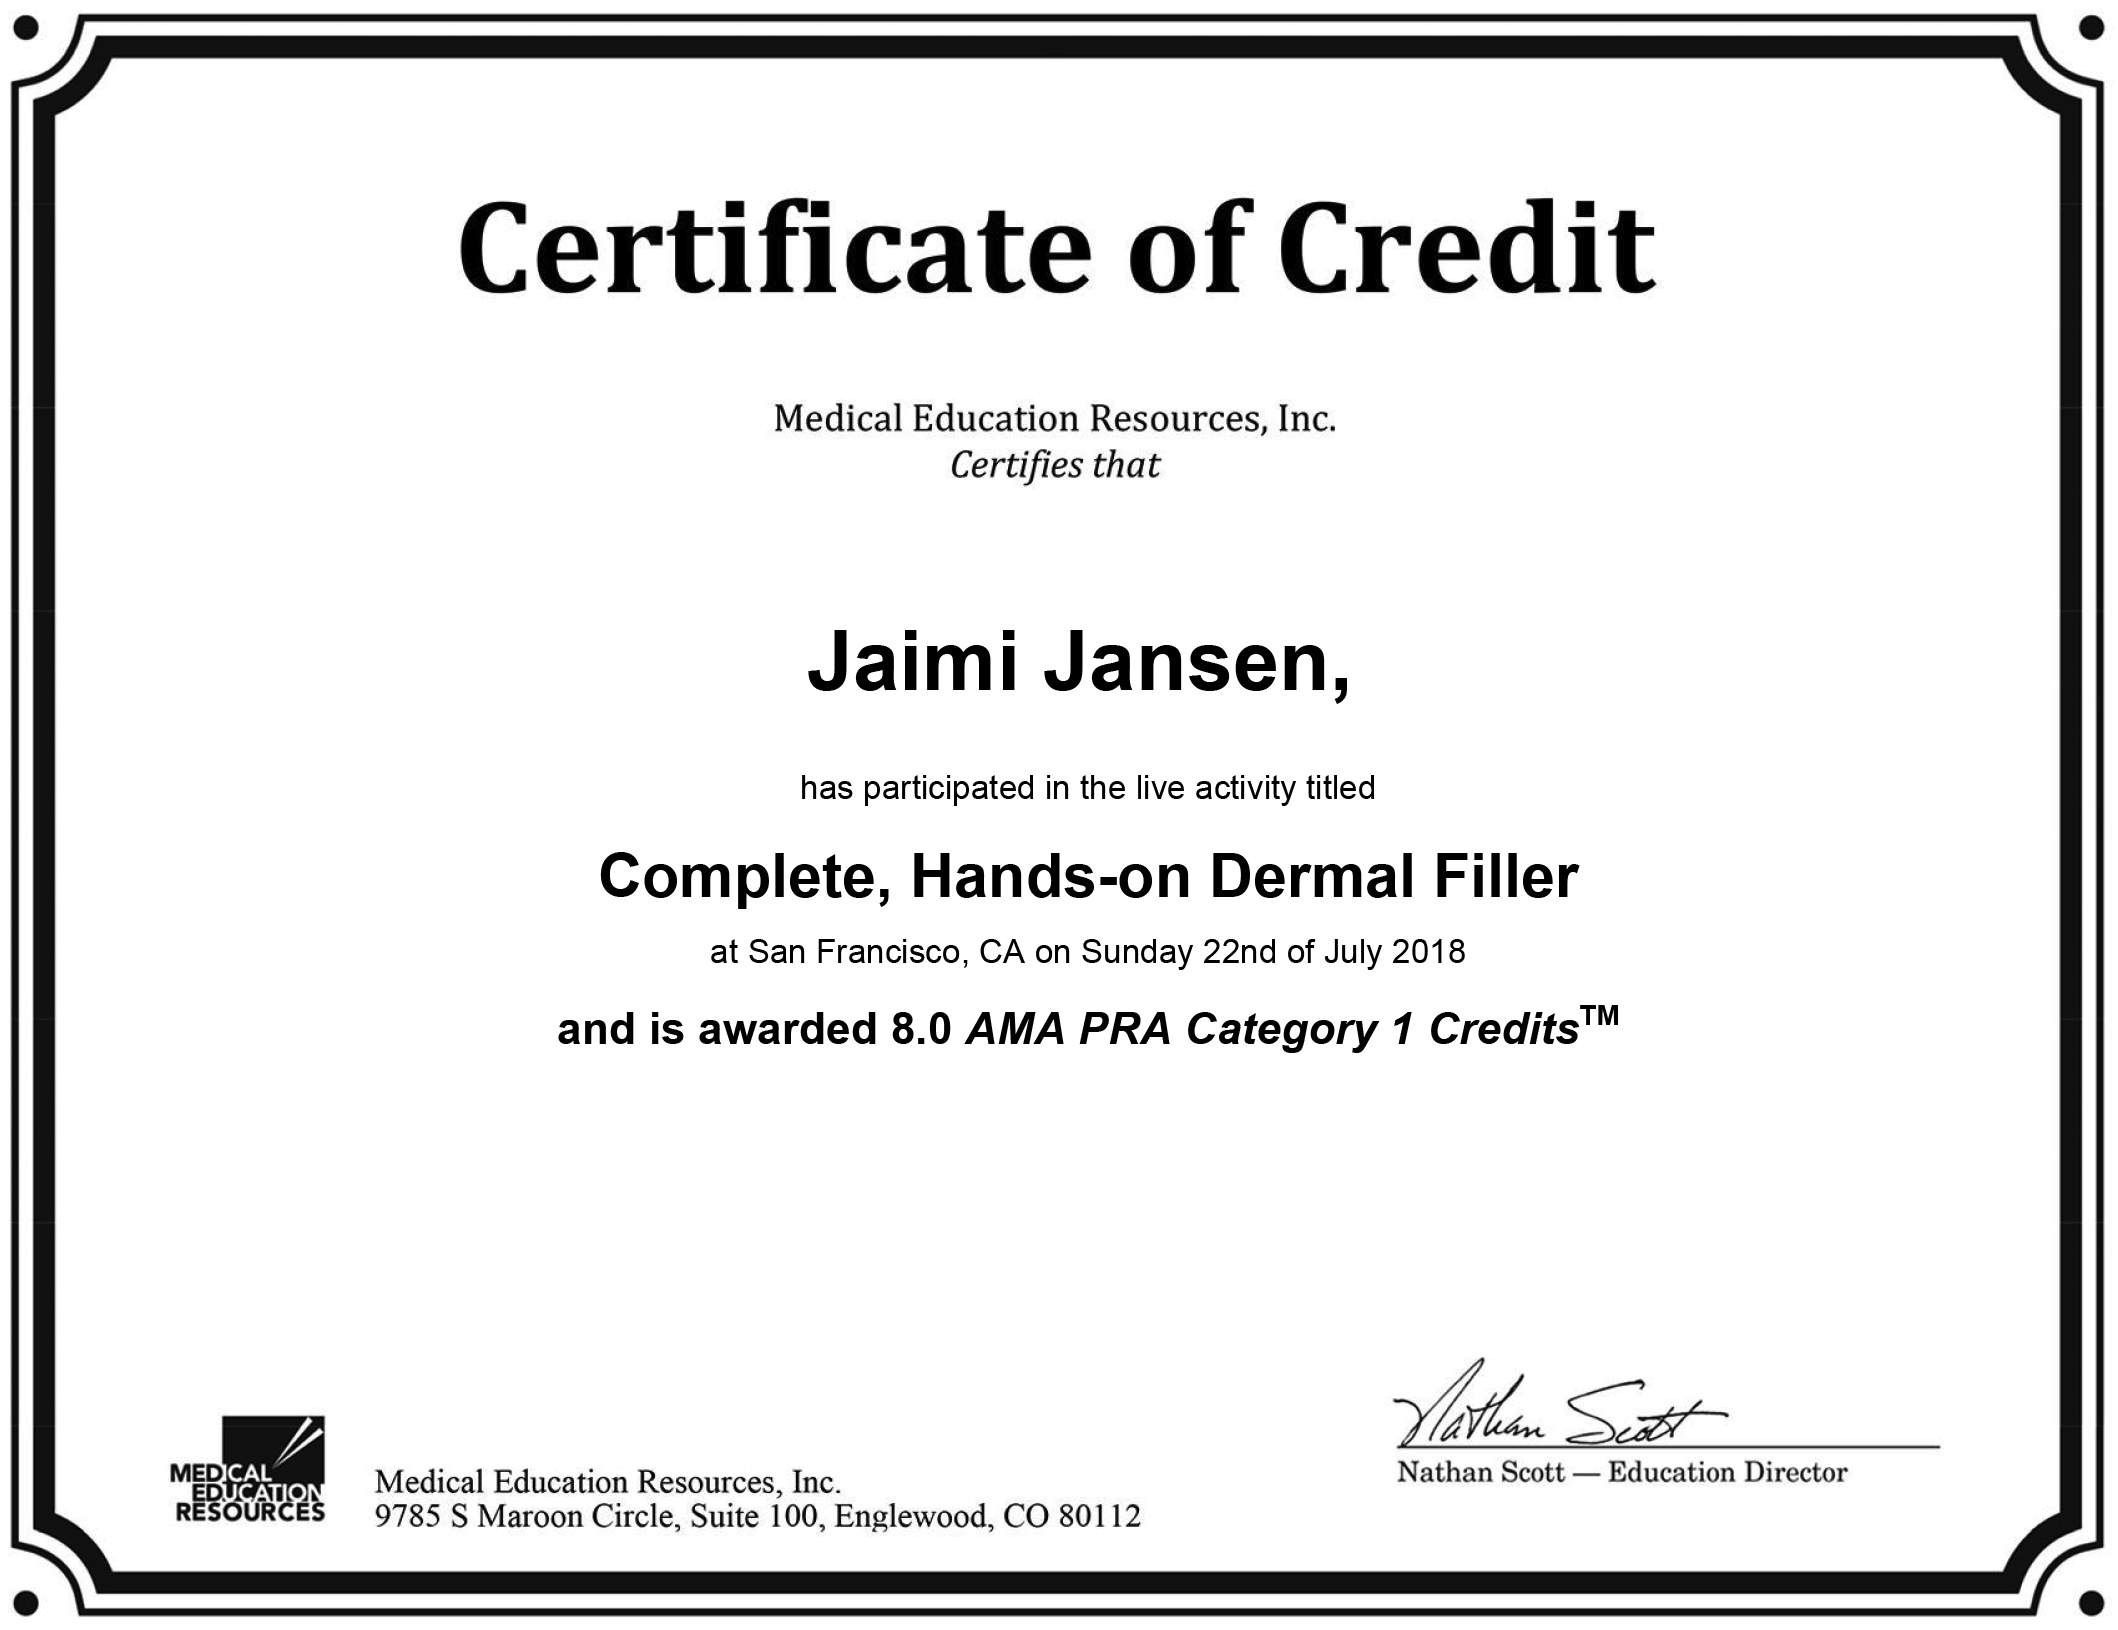 Jaimie Janson is certified and able to give dermal filler